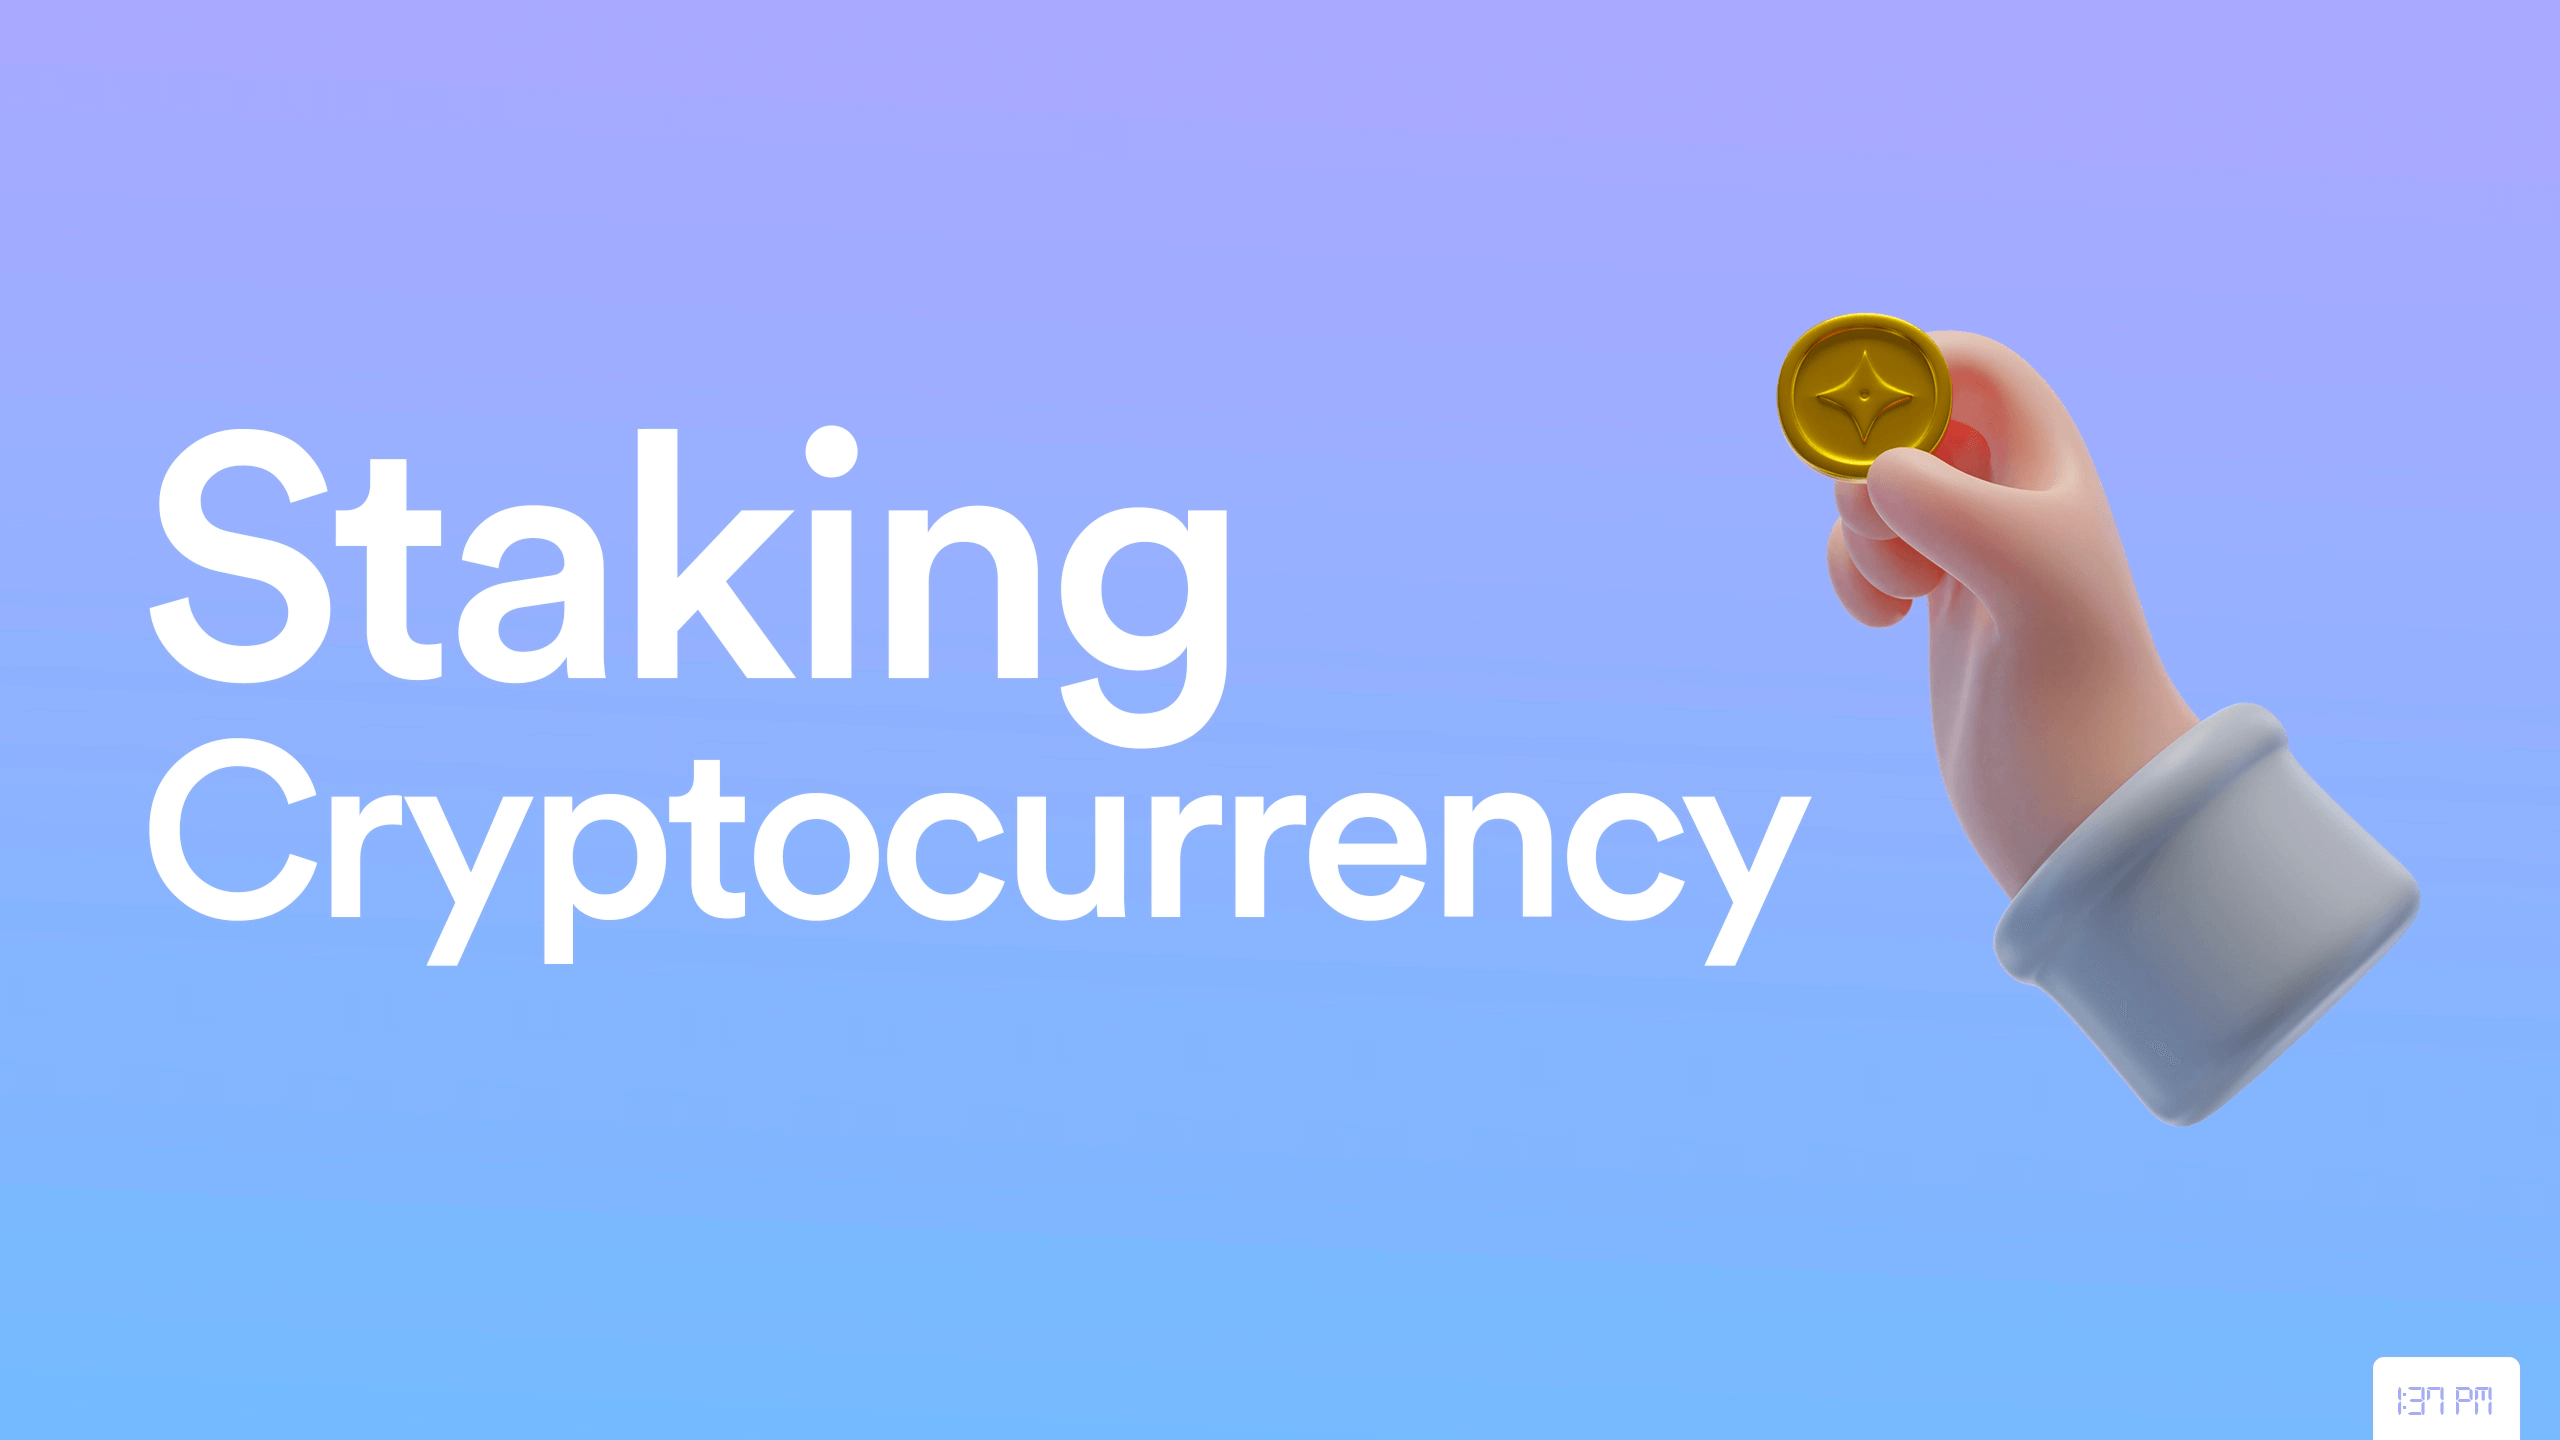 hand holding up a coin with text that reads 'staking cryptocurrency'